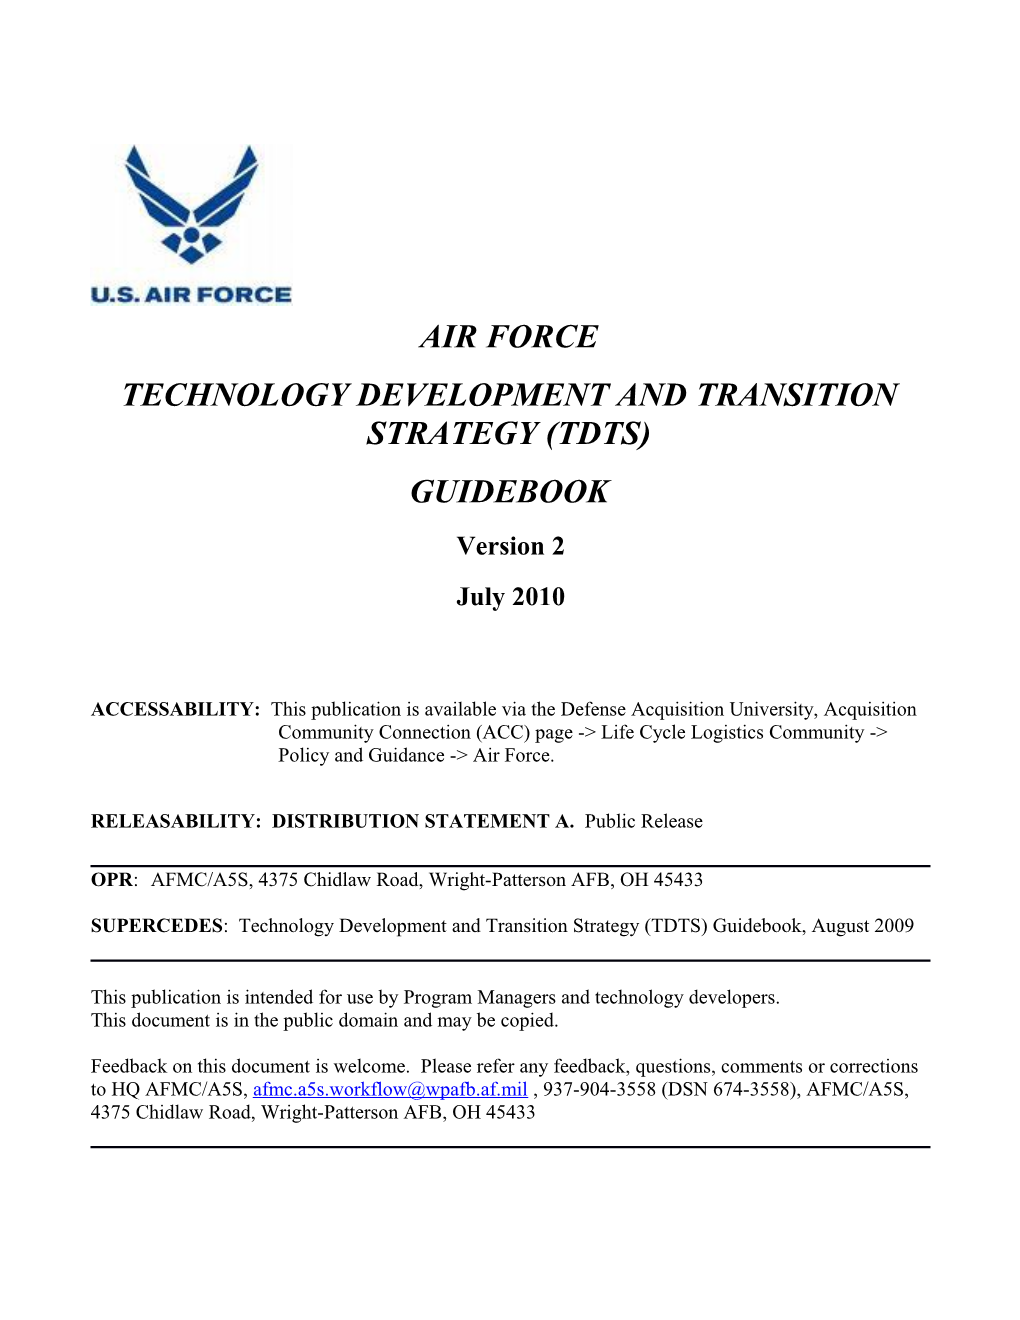 Technology Development and Transition Strategy (TDTS) Guide